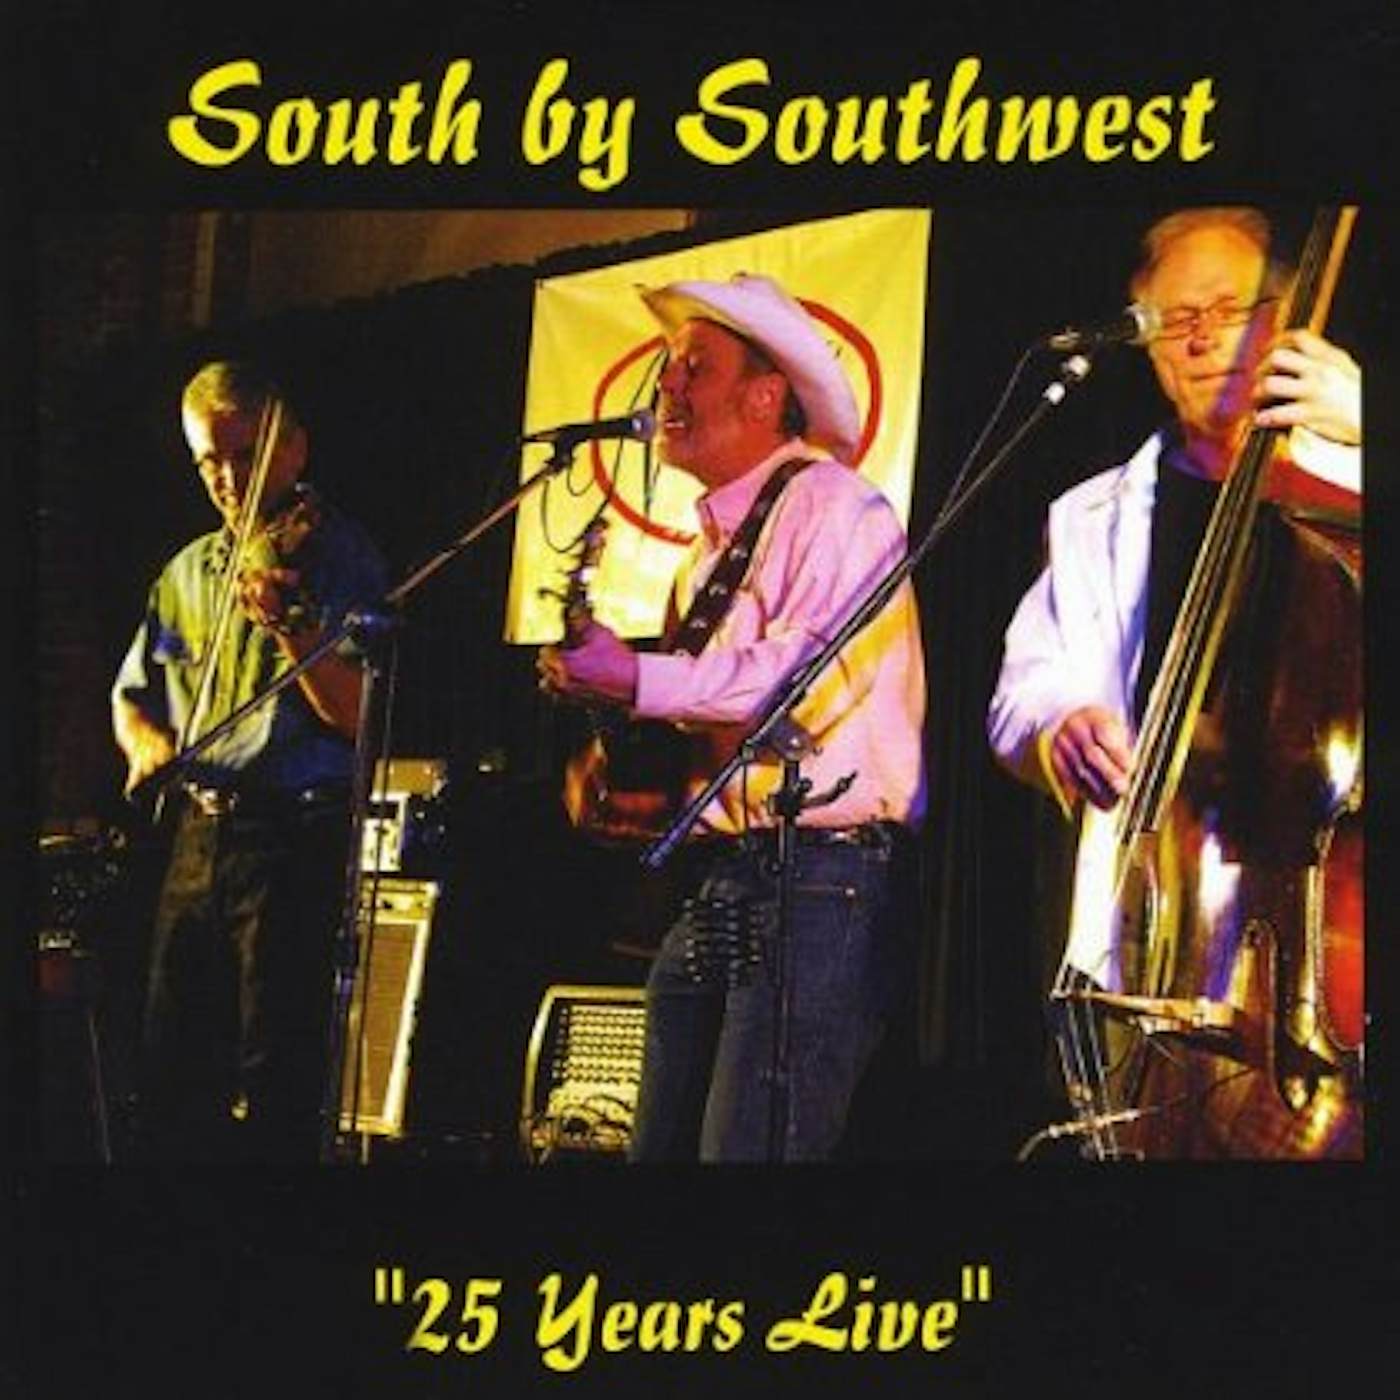 South By Southwest 25 YEARS LIVE CD